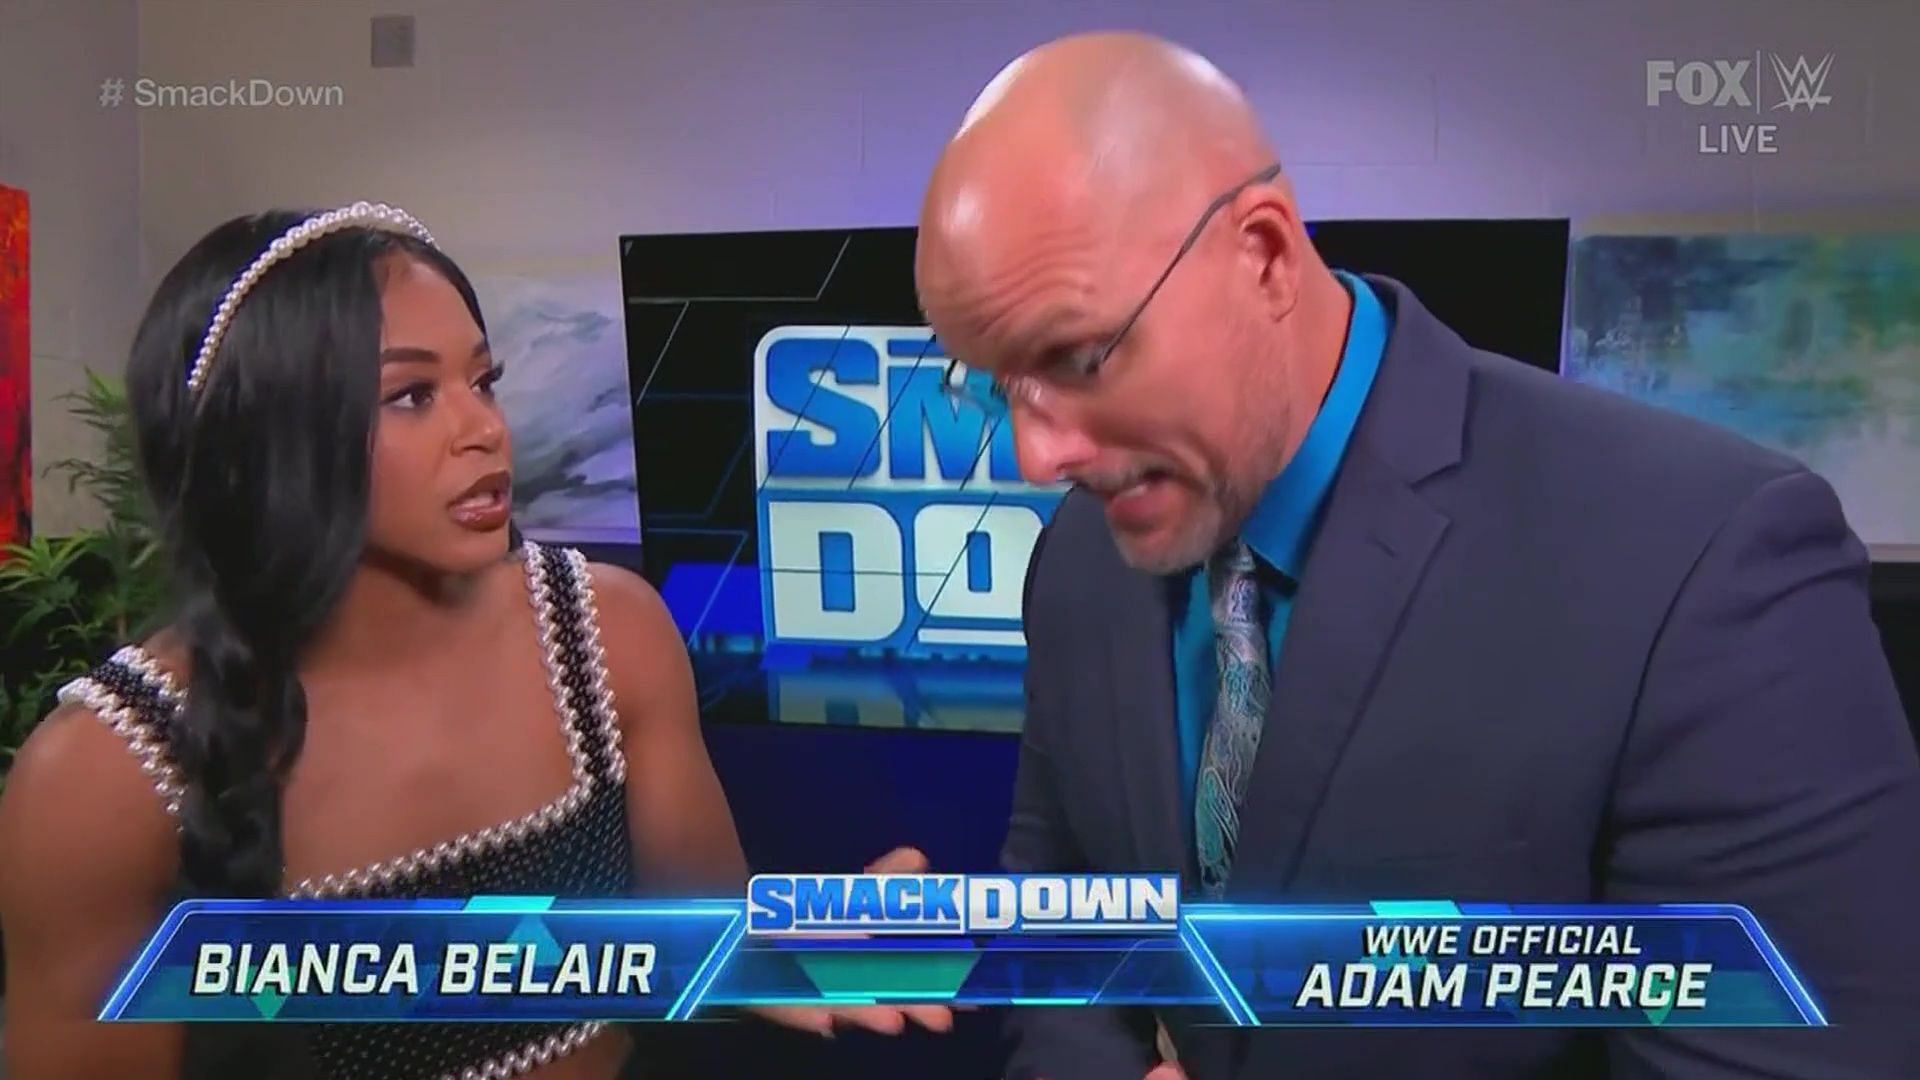 Adam Pearce keeps denying Bianca Belair a chance to regain her title.